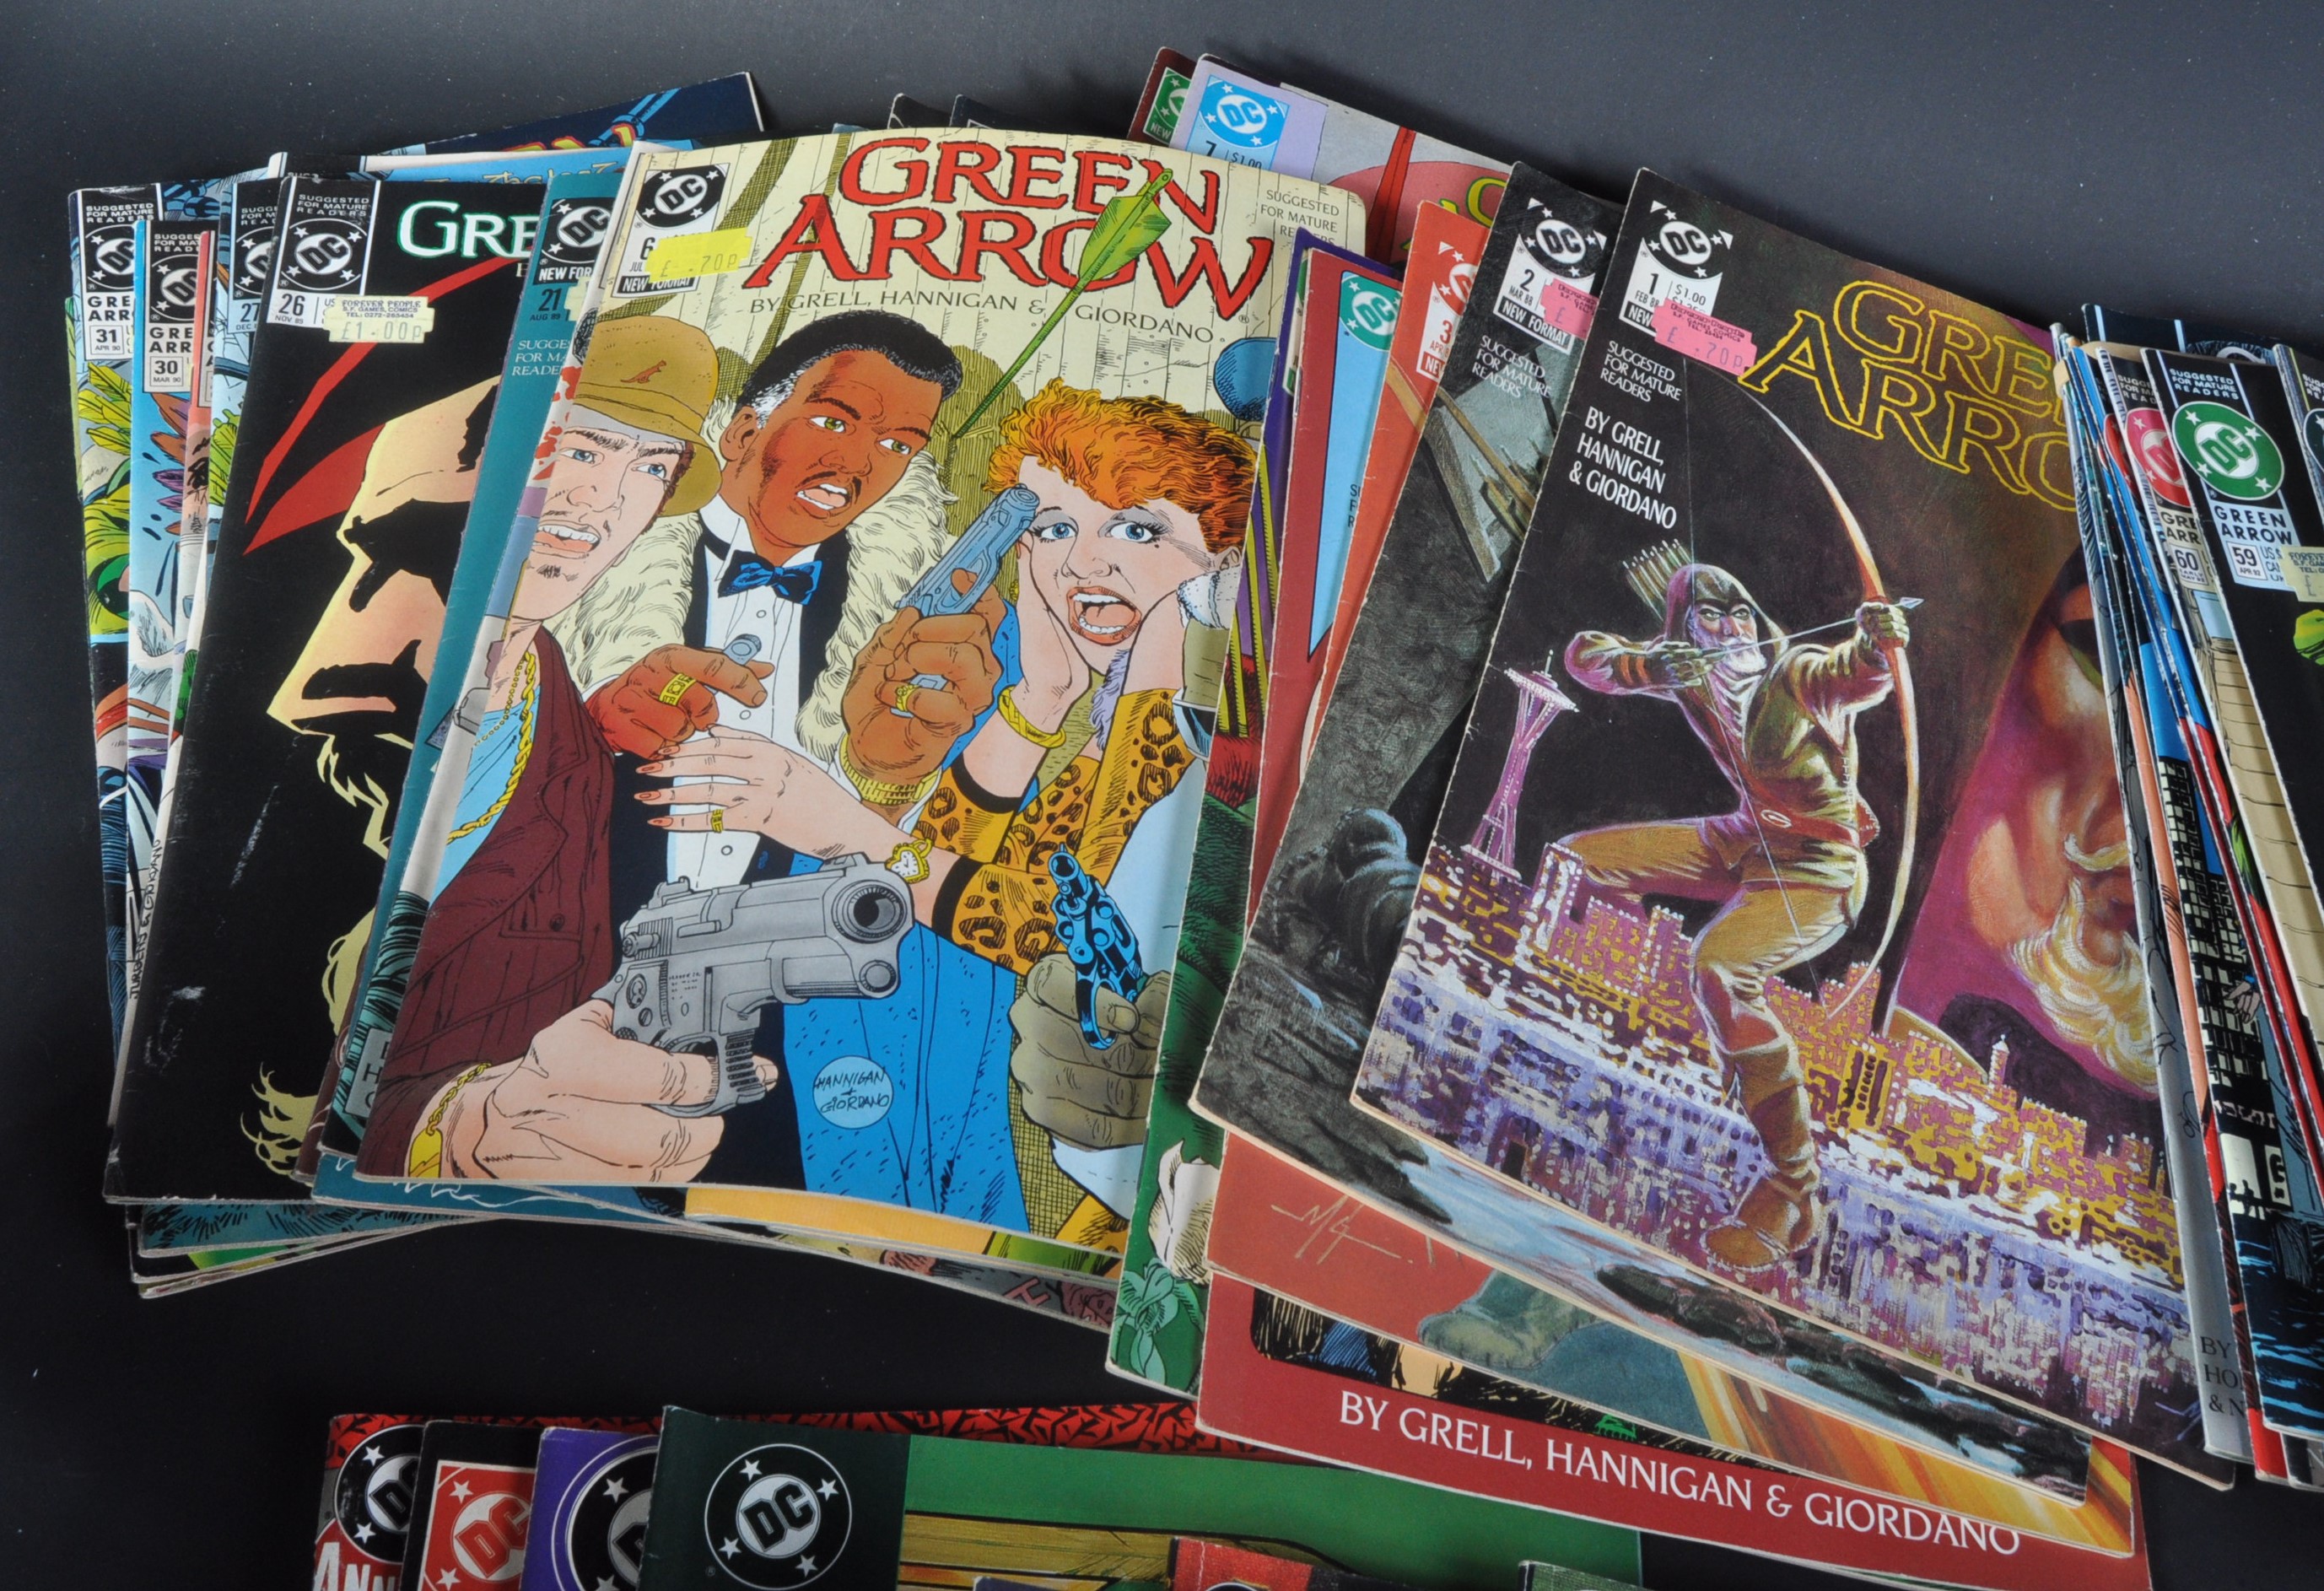 DC COMICS - GREEN ARROW - COLLECTION OF VINTAGE COMIC BOOKS - Image 4 of 6